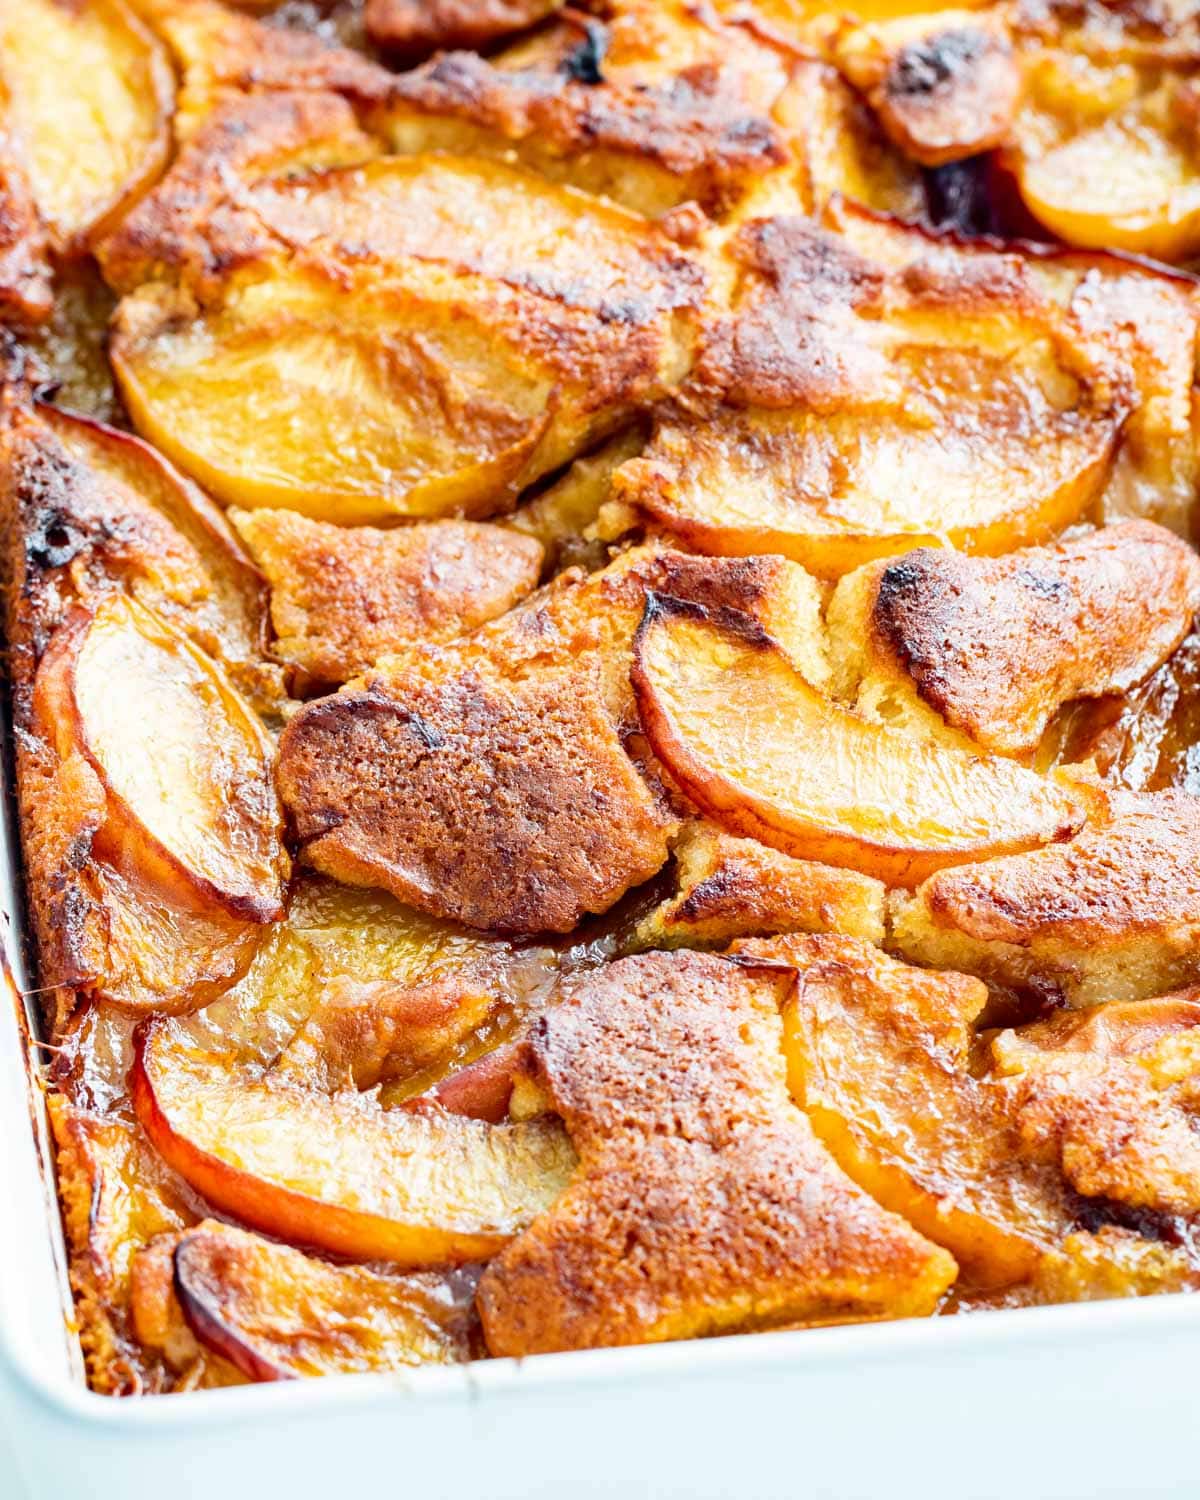 side view shot of a peach cobbler fresh out of the oven in a baking dish